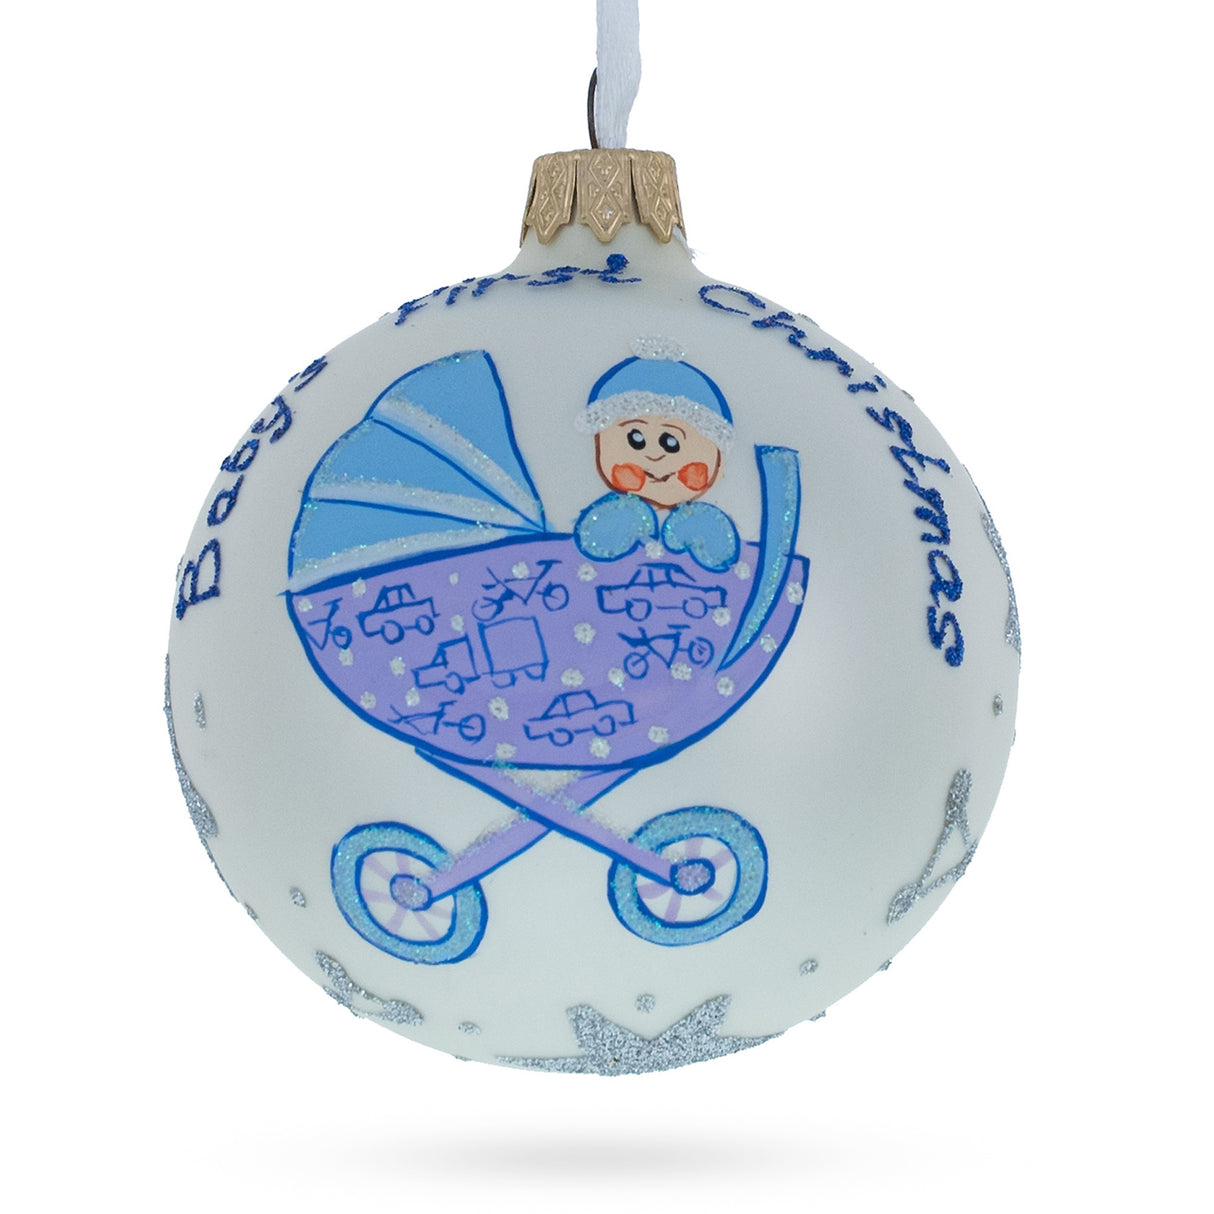 Cherubic Boy in Cozy Stroller Blown Glass Ball Baby's First Christmas Ornament 3.25 Inches in White color, Round shape